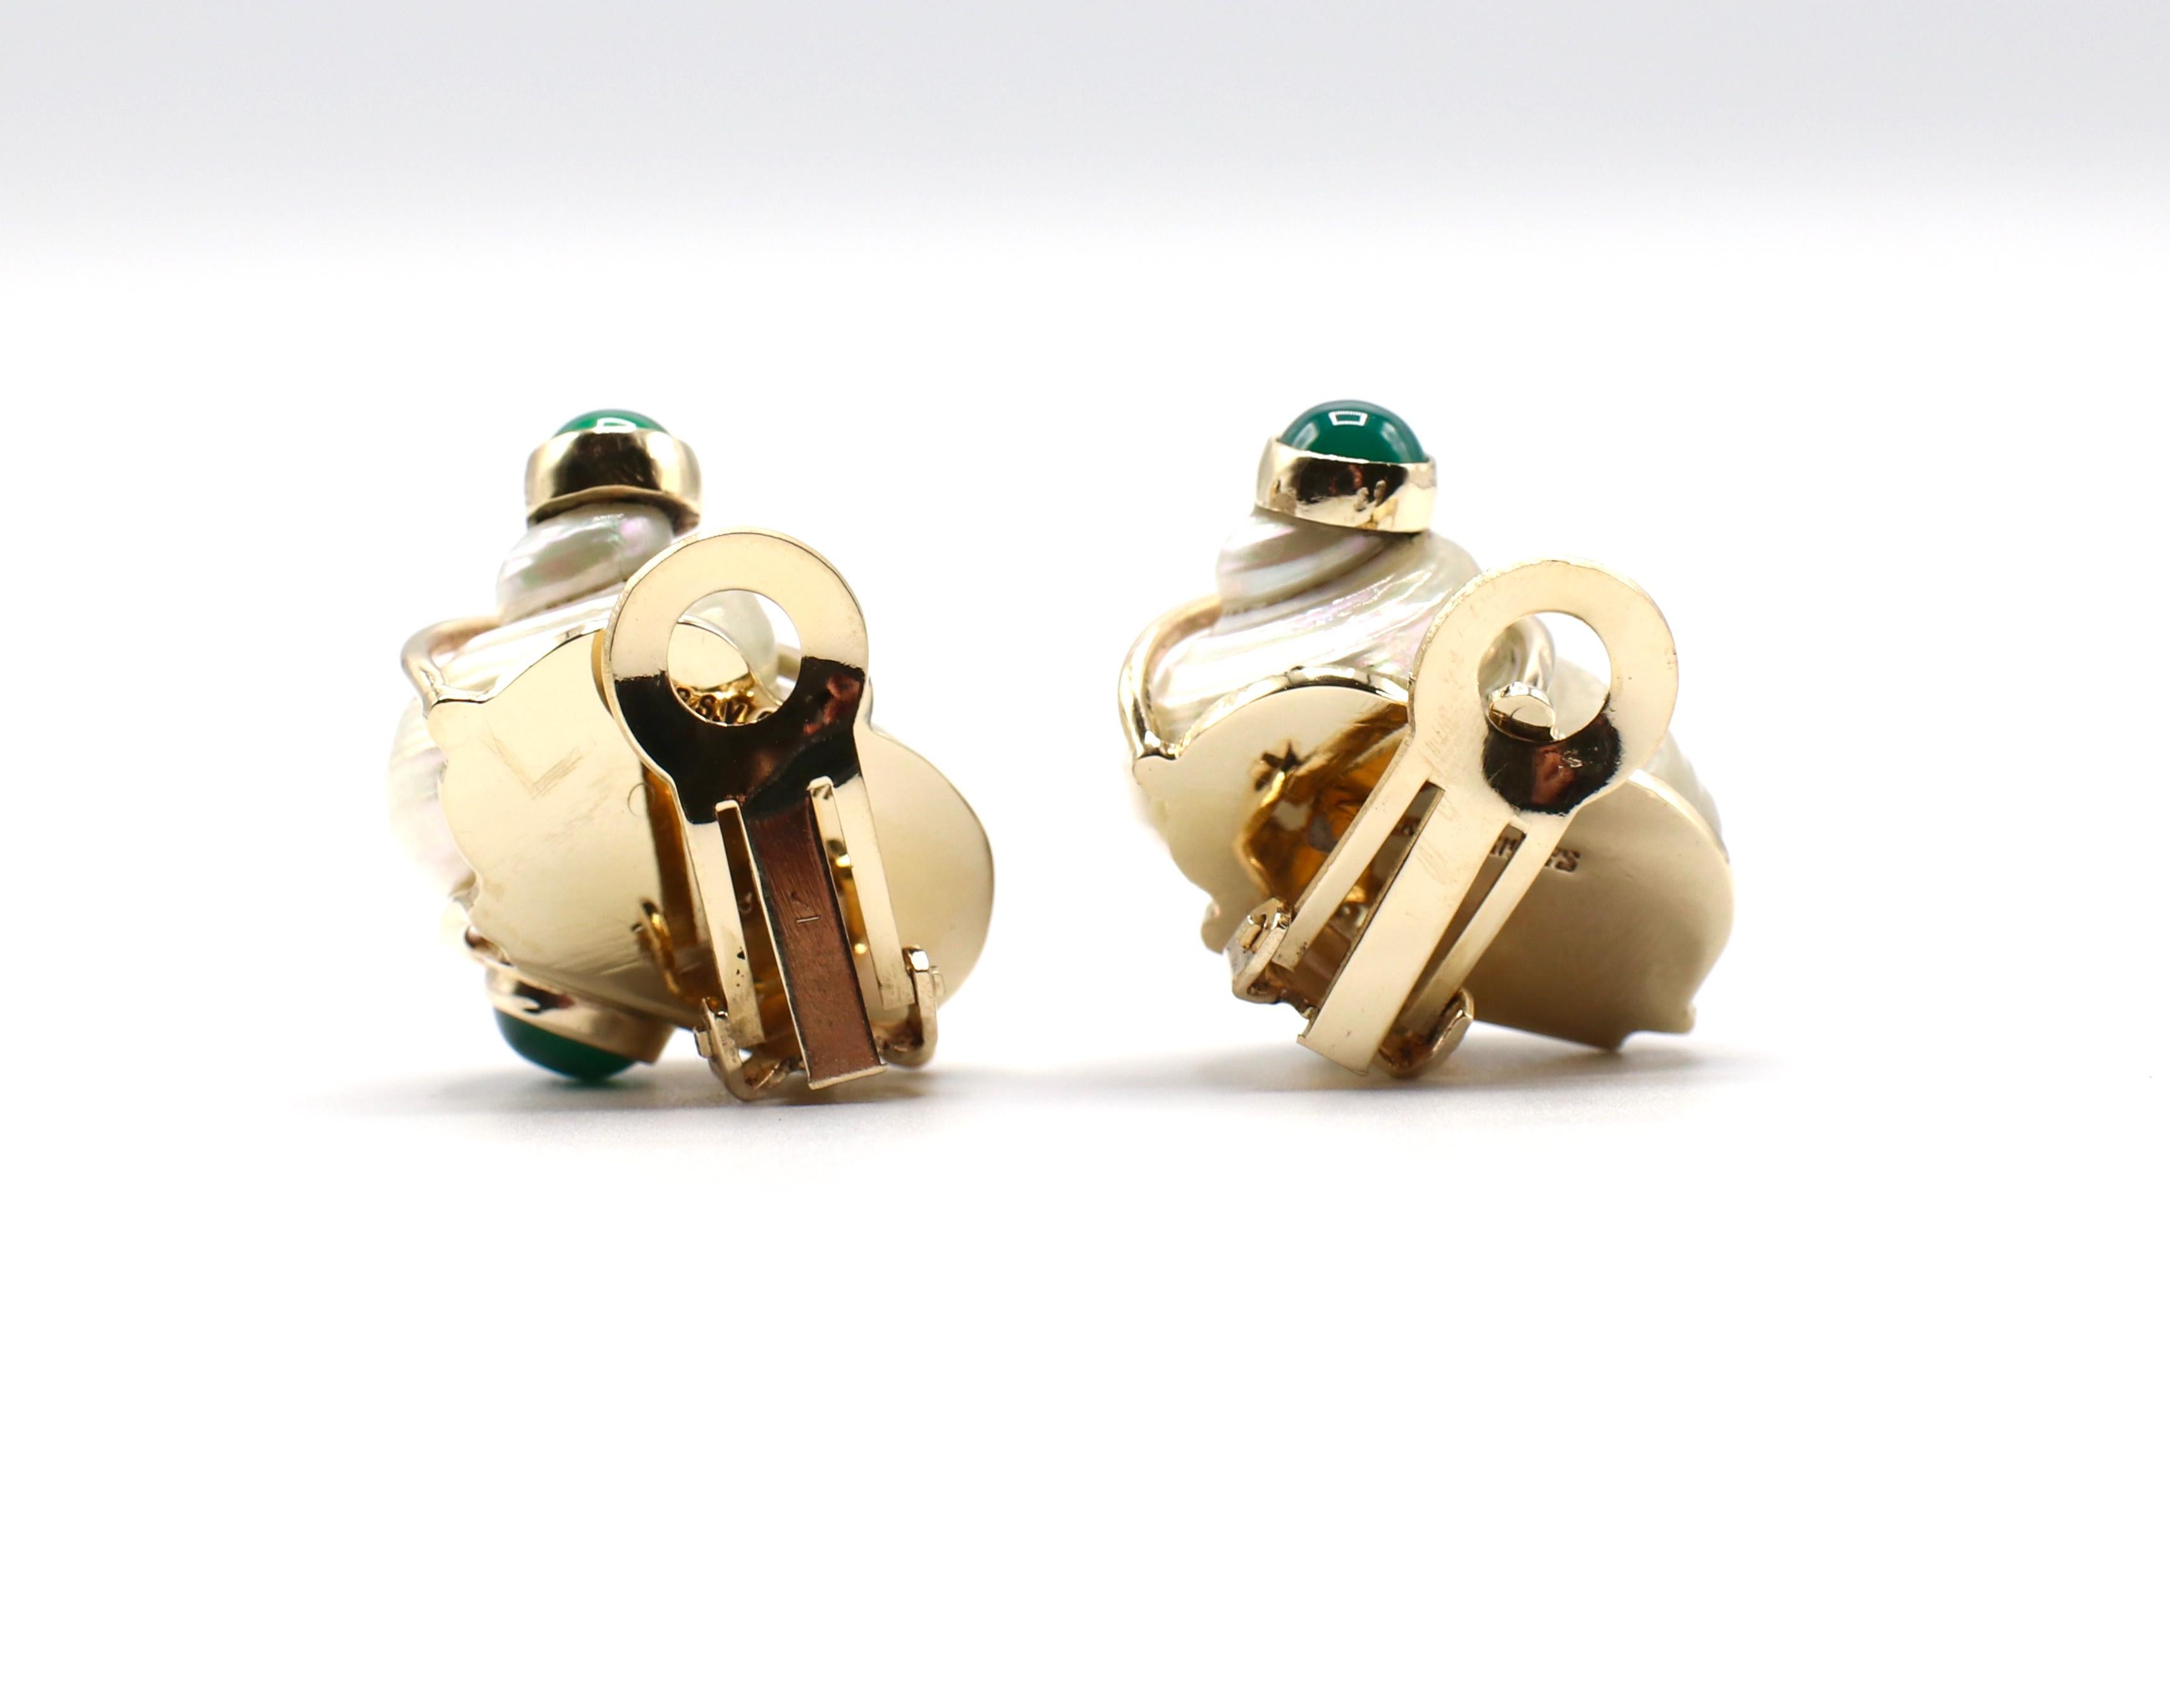 Vintage Seaman Schepps 1960's Turbo Shell Patricia Vail Earrings 14K Yellow Gold & Green Chalcedony

Metal: 14k yellow gold
Signed: P.S.V of Seaman Schepps 
4 dyed green chalcedony cabochon stones, 5.5mm each
Earrings are approx. 1 inch long
Shell